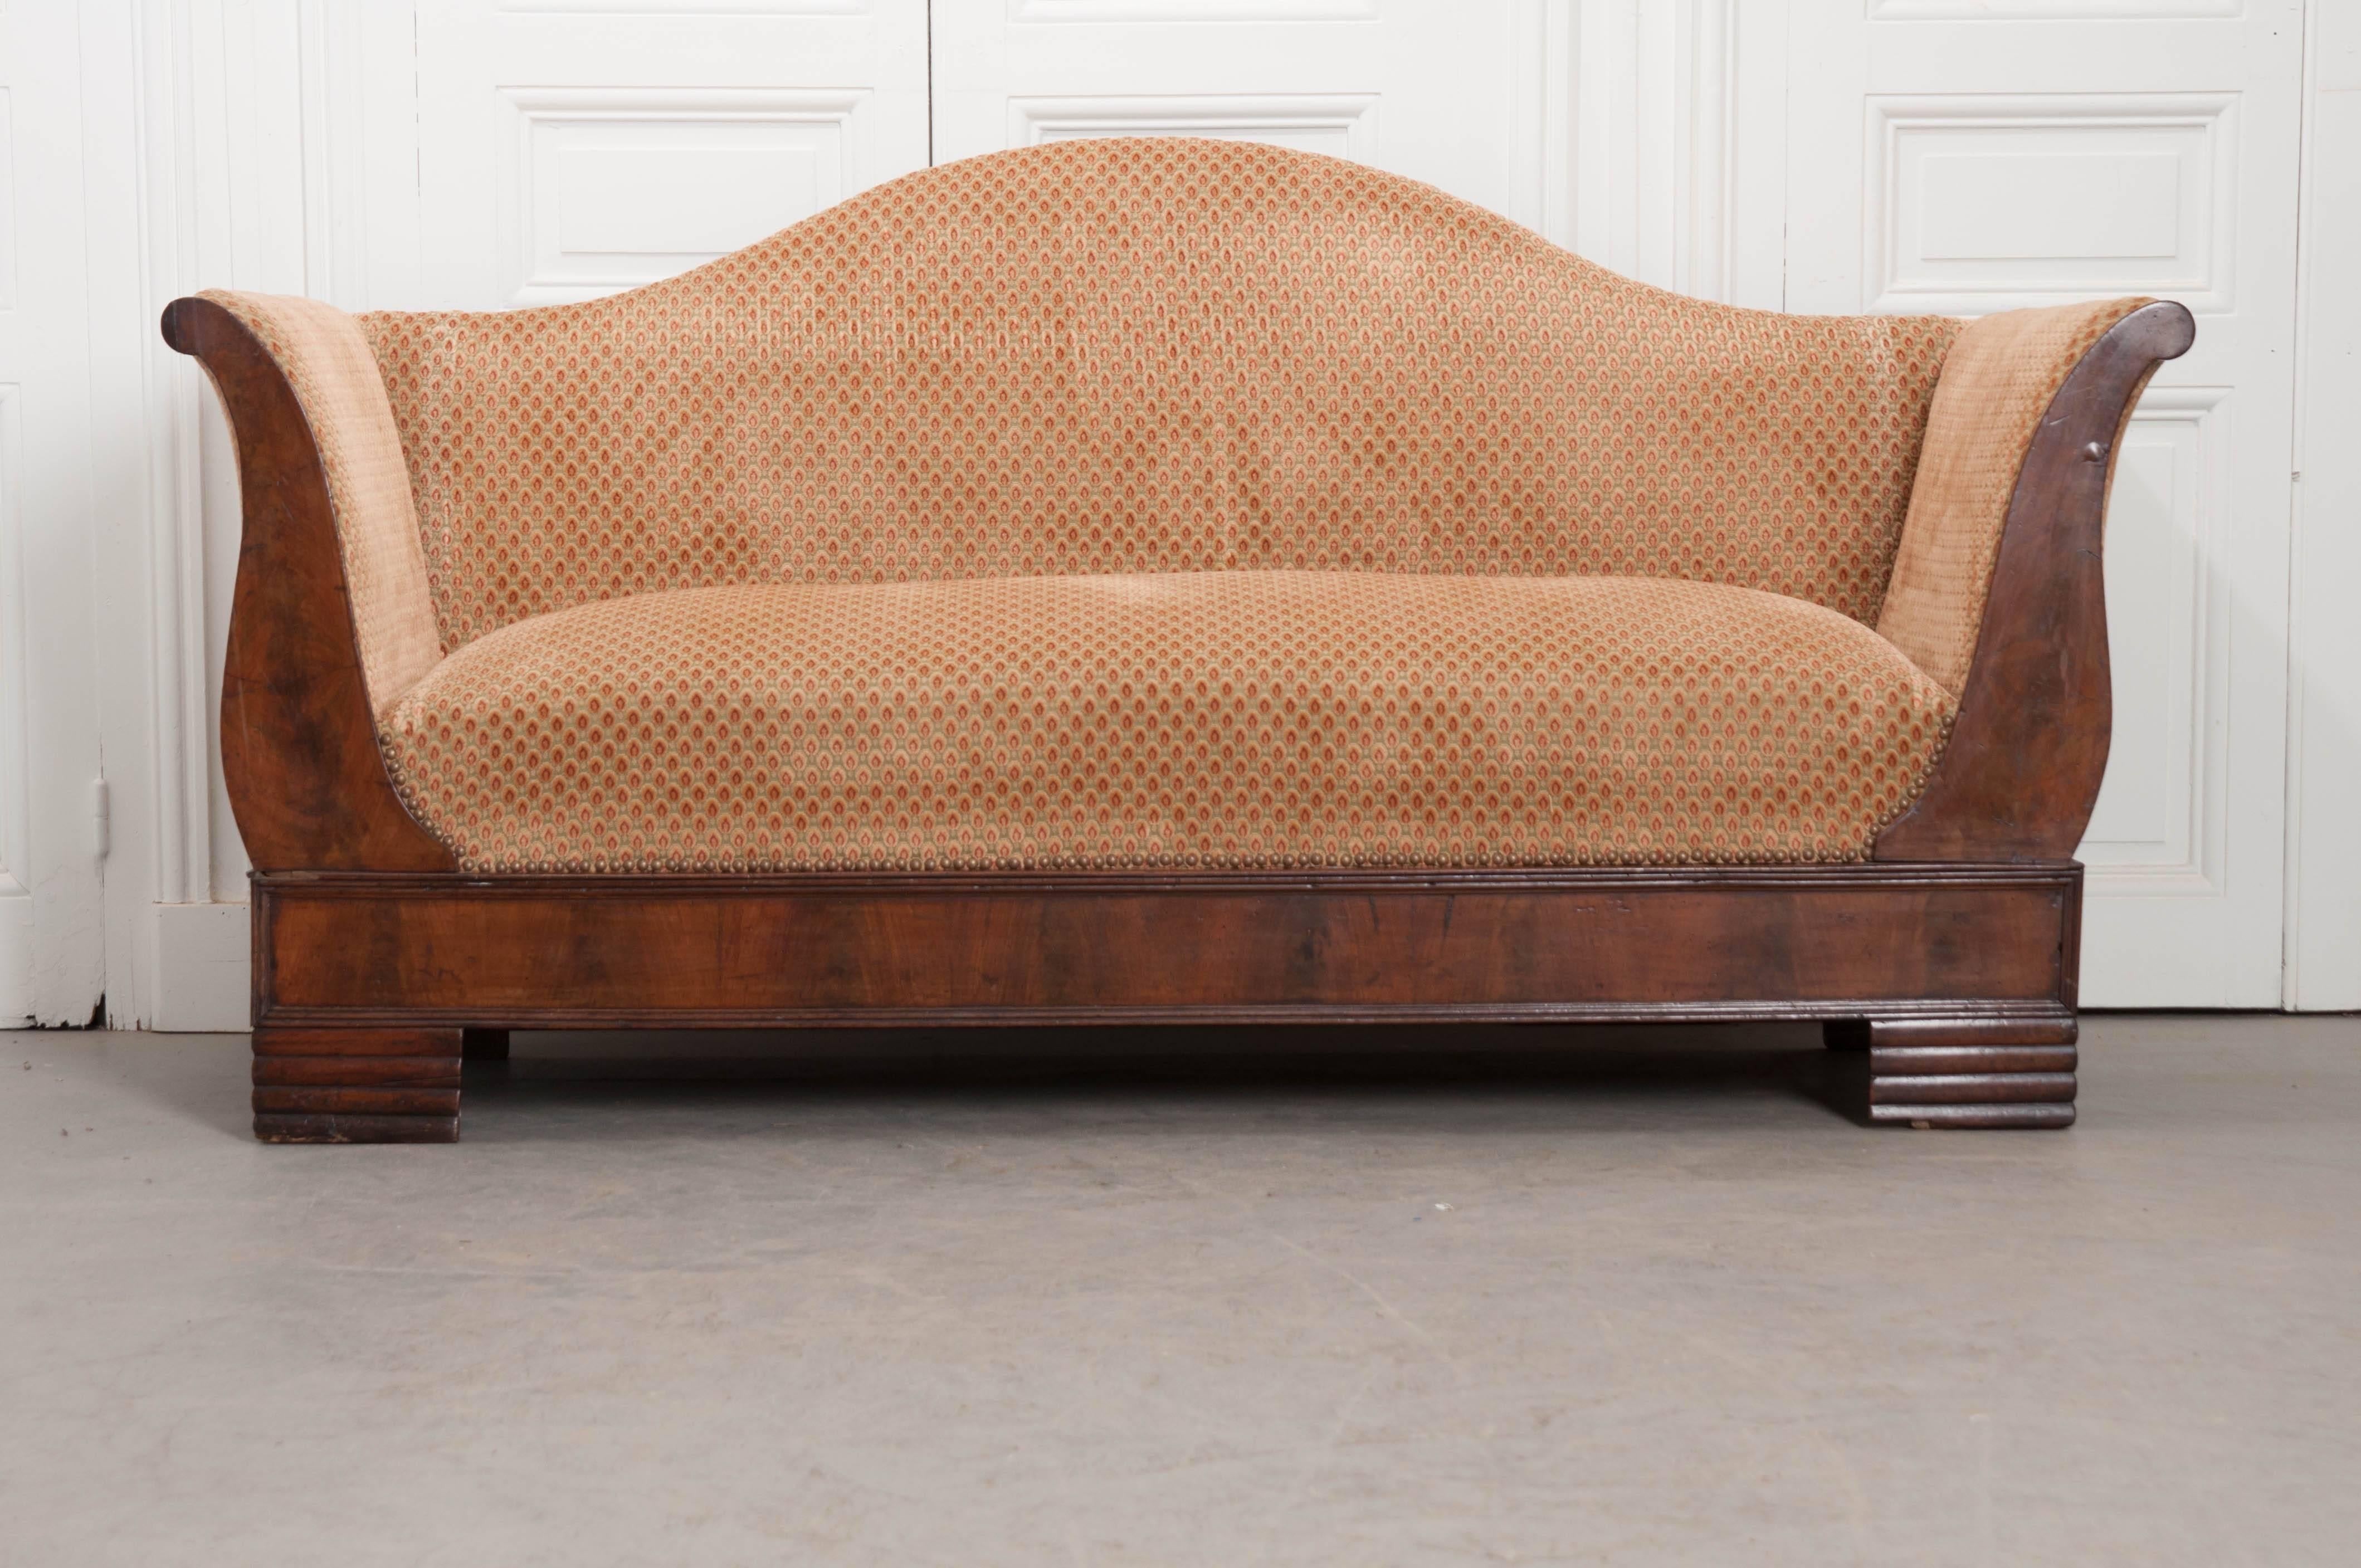 This sensational canapé was made in France, circa 1870. The settee has been made in the Louis Philippe style, with carefully book matched walnut veneer that is stunning. The sofa is upholstered in a patterned cut velvet in colors of sage, gold and